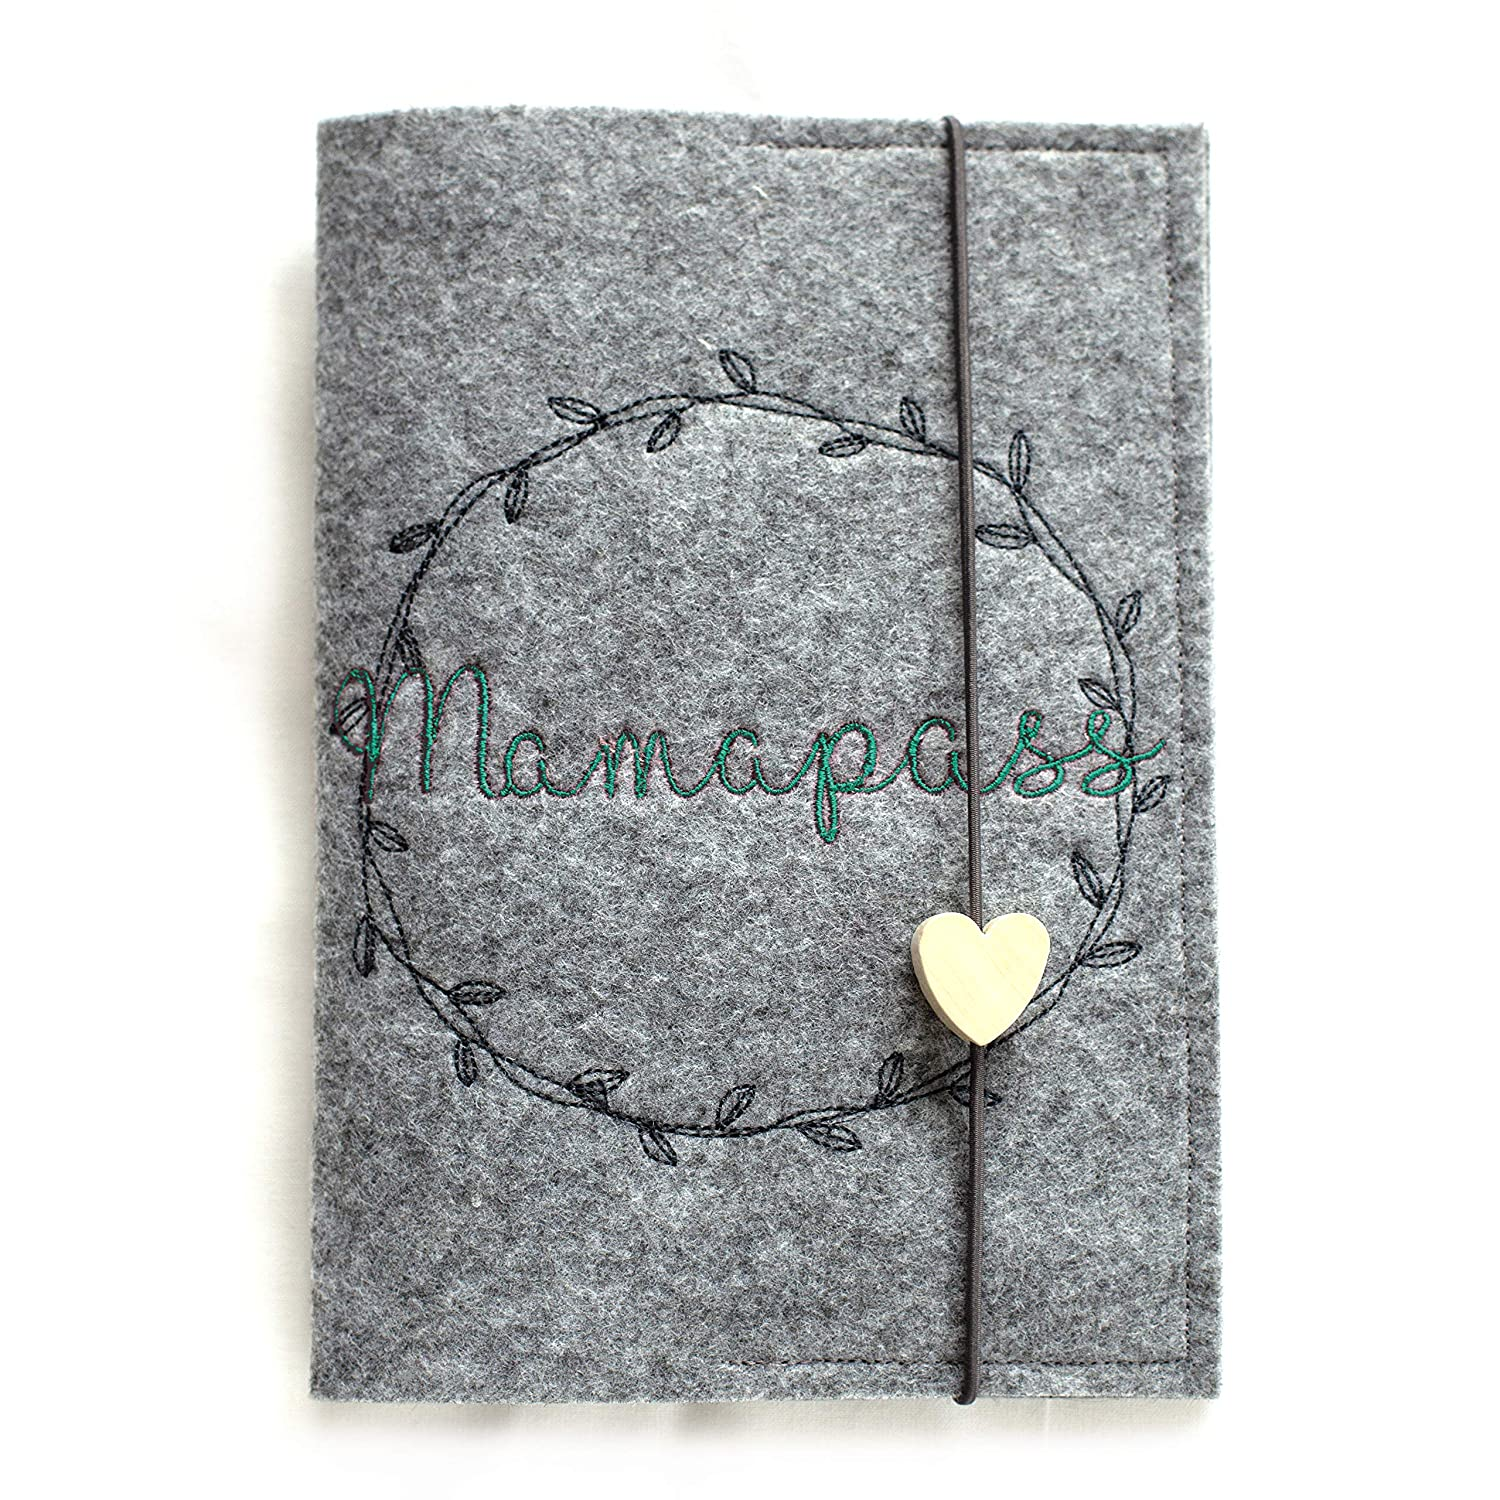 Felt Book Cover with Compartments for Booklet,Insurance Card,Vaccination Certificate and Maternity Passport